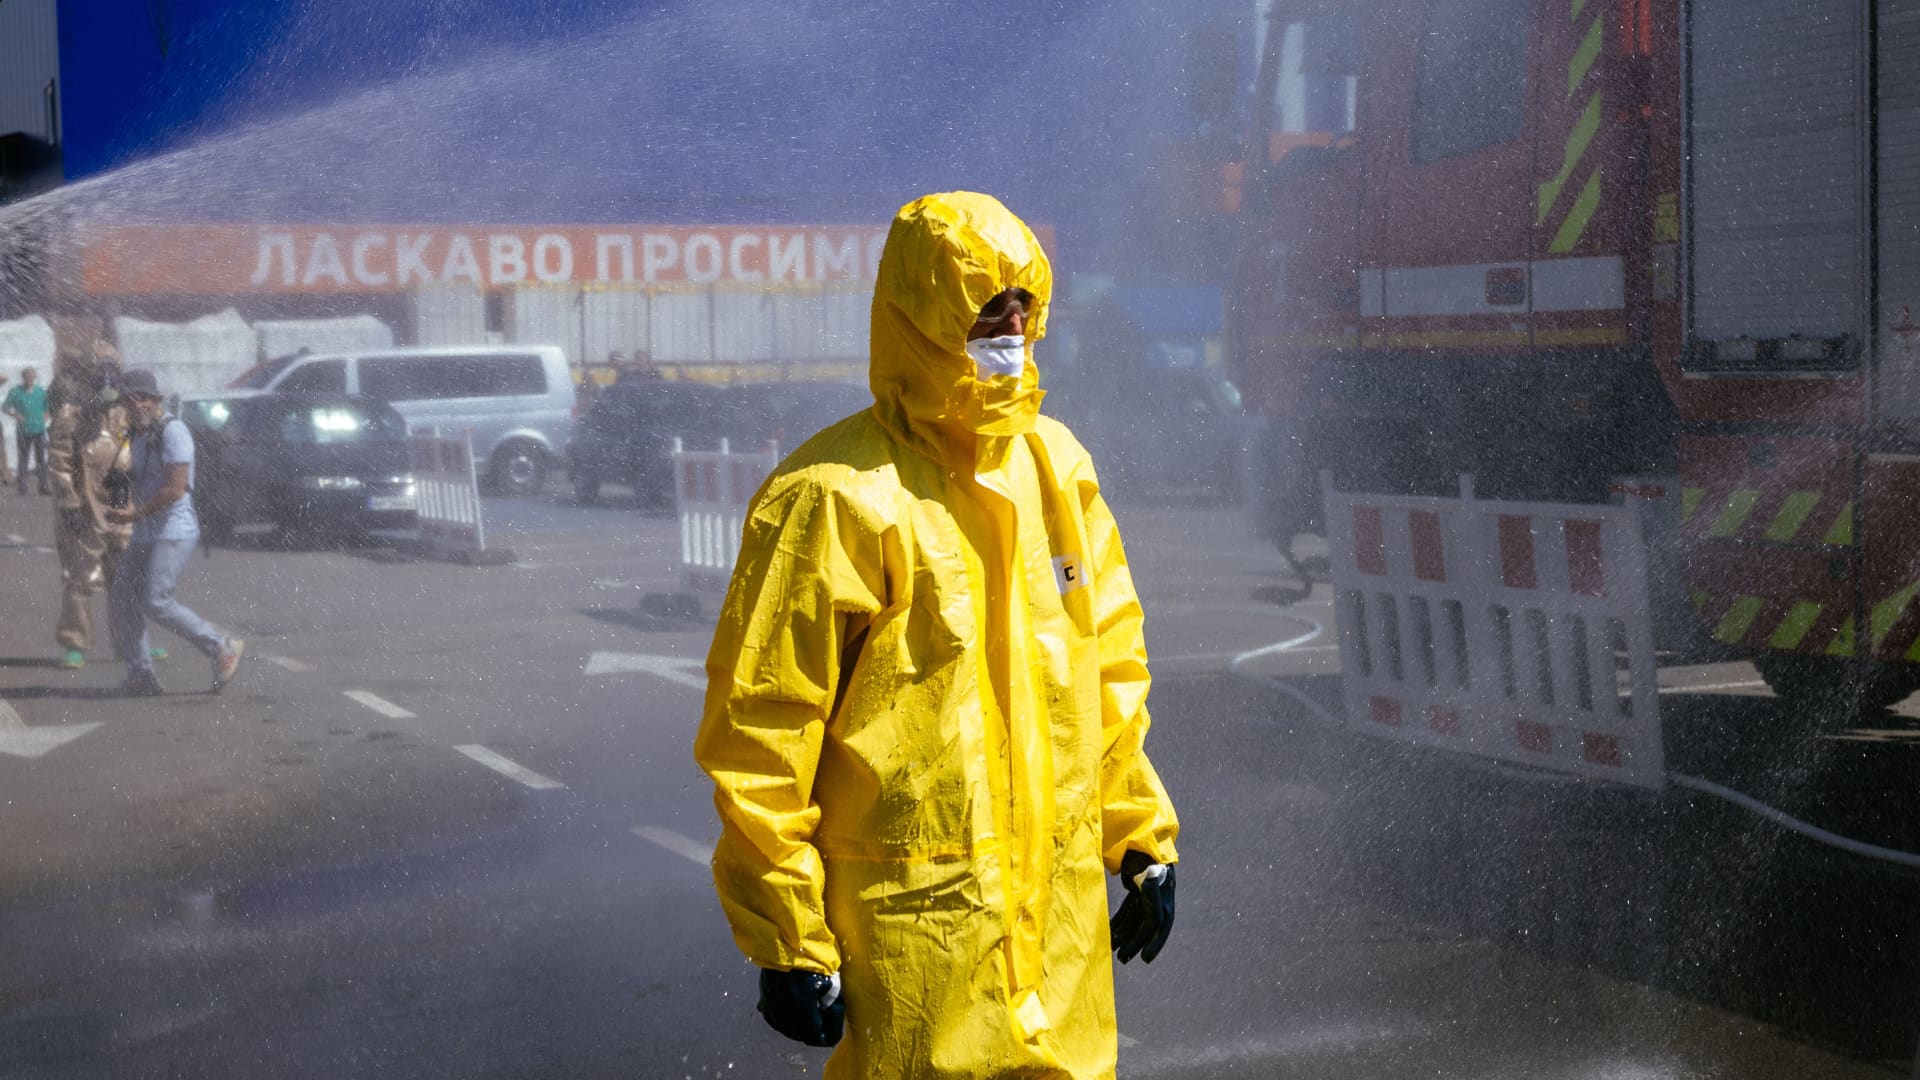 A Ukrainian Emergency Ministry rescuer attends an exercise in the city of Zaporizhzhia on Aug. 17, 2022, in case of a nuclear accident at the Zaporizhzhia nuclear power plant located near the city.